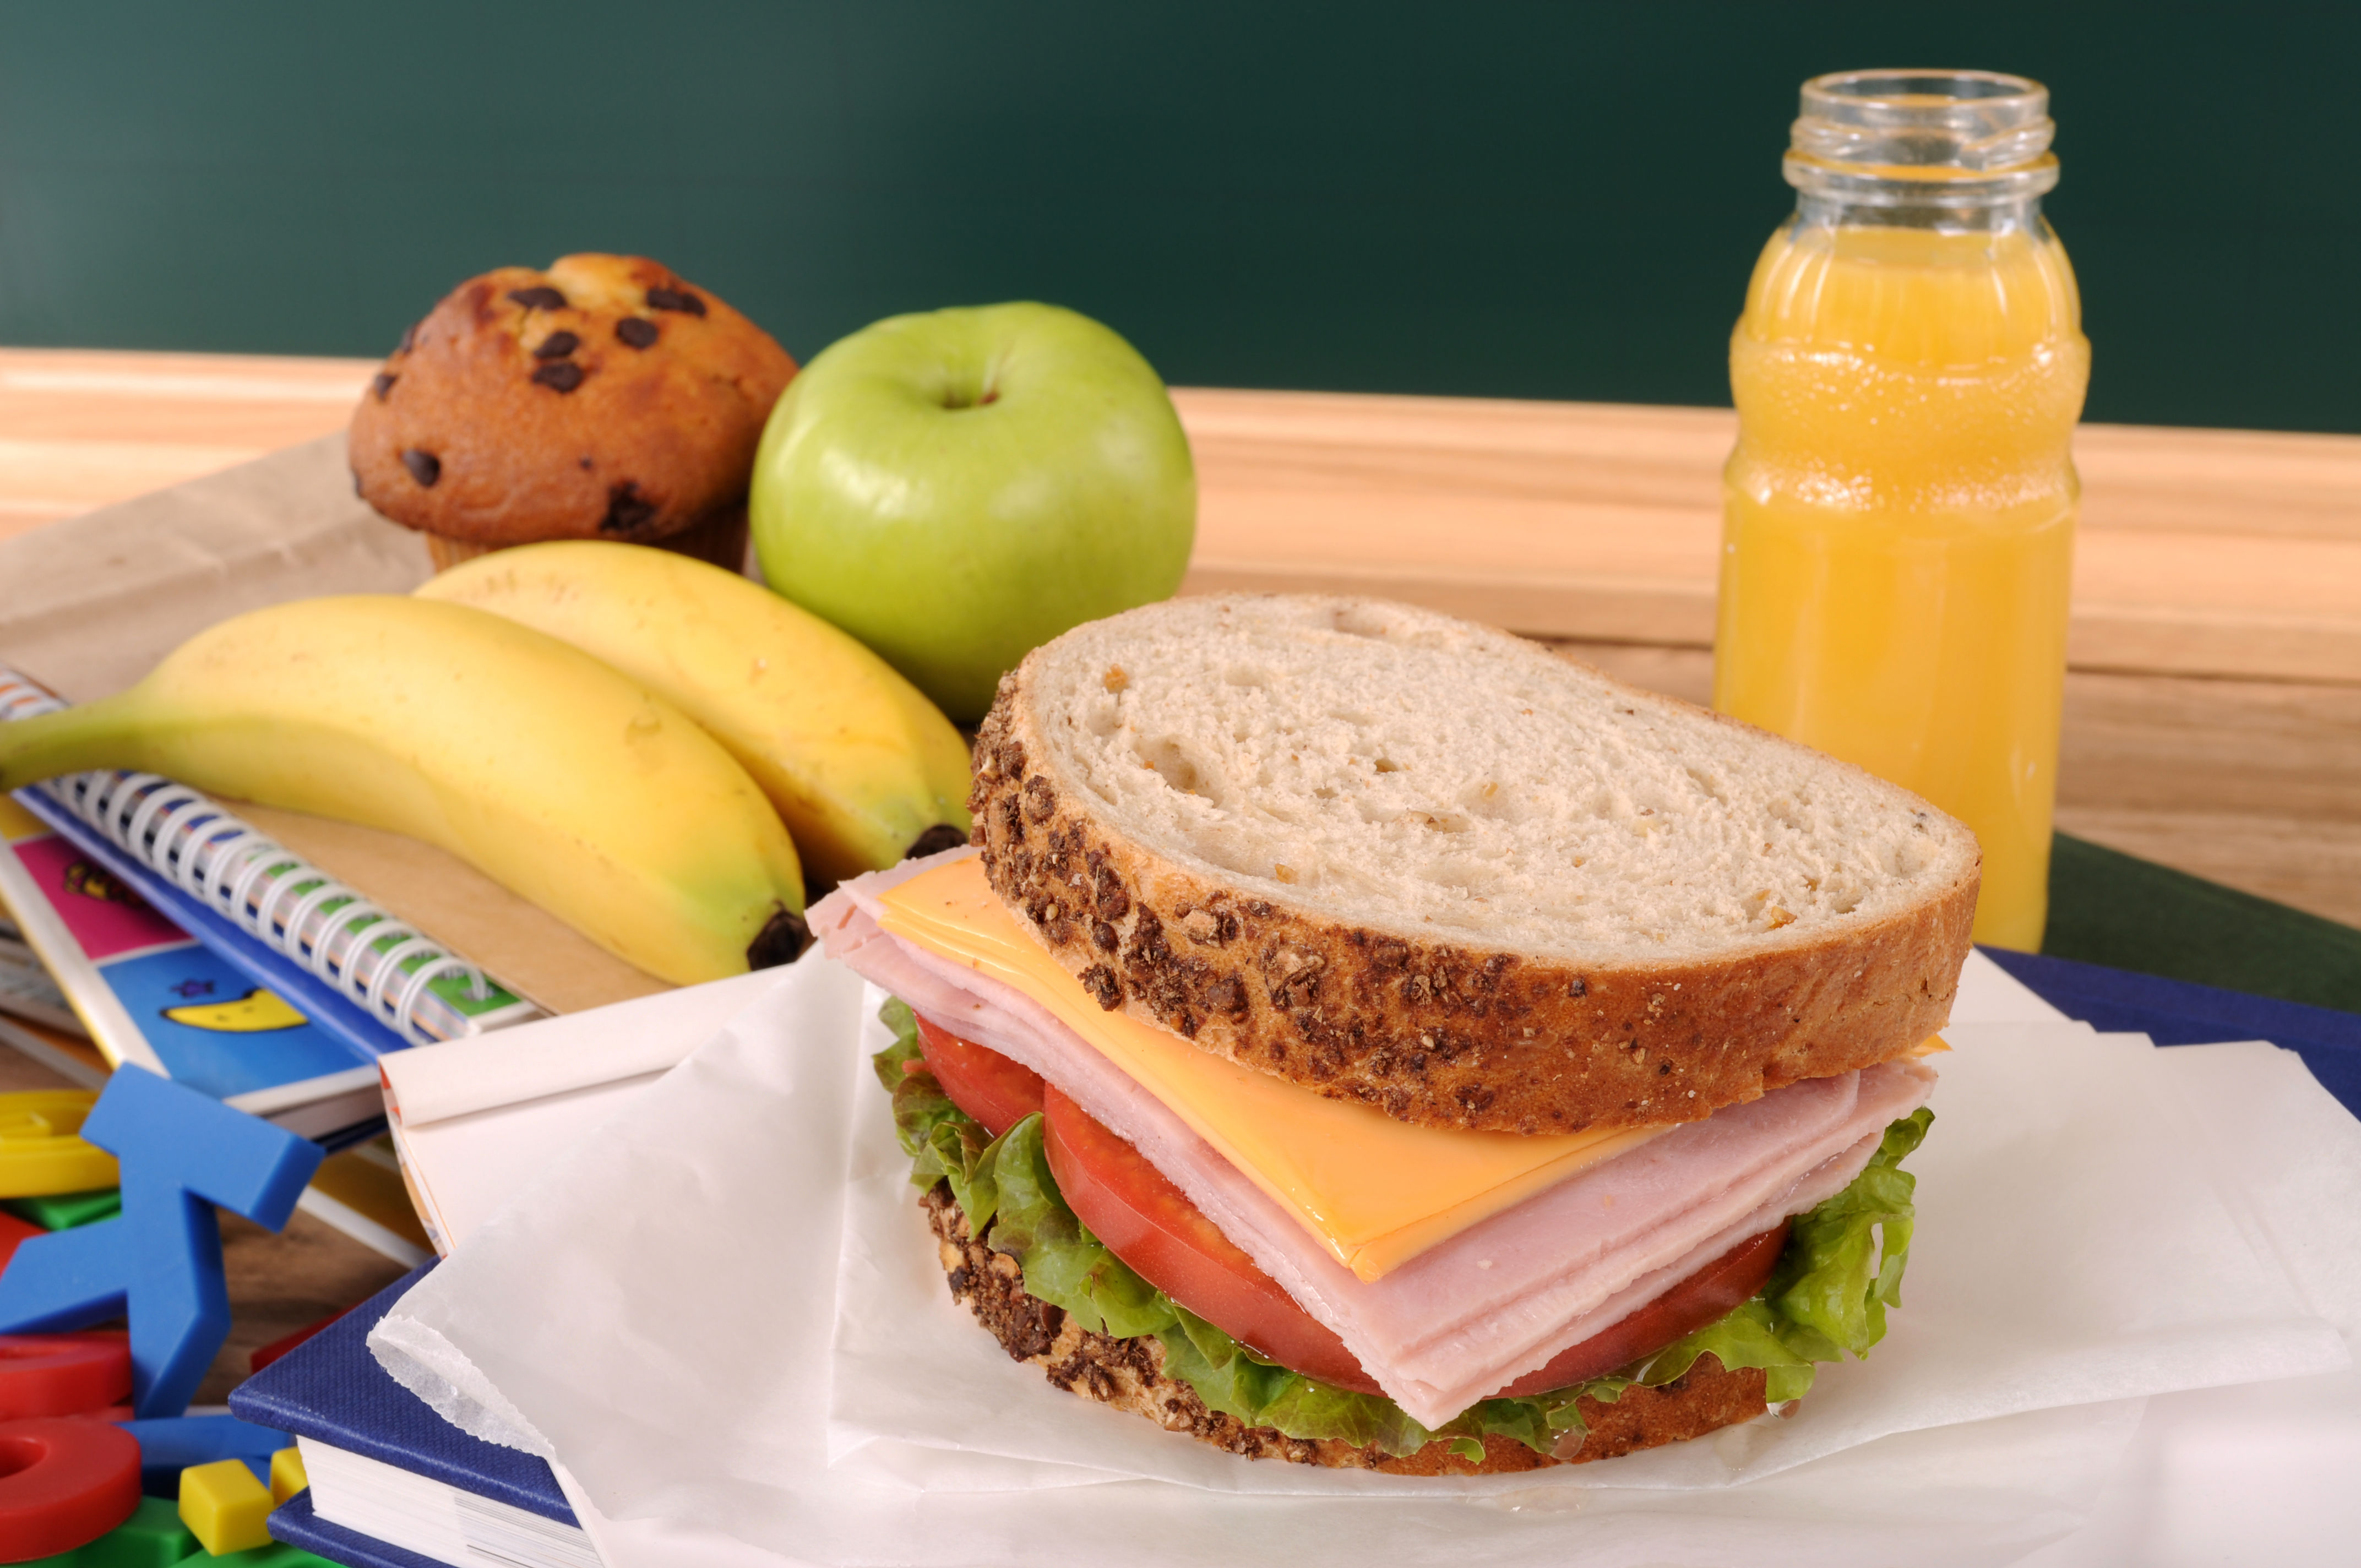 Example of a school lunch ordered online.